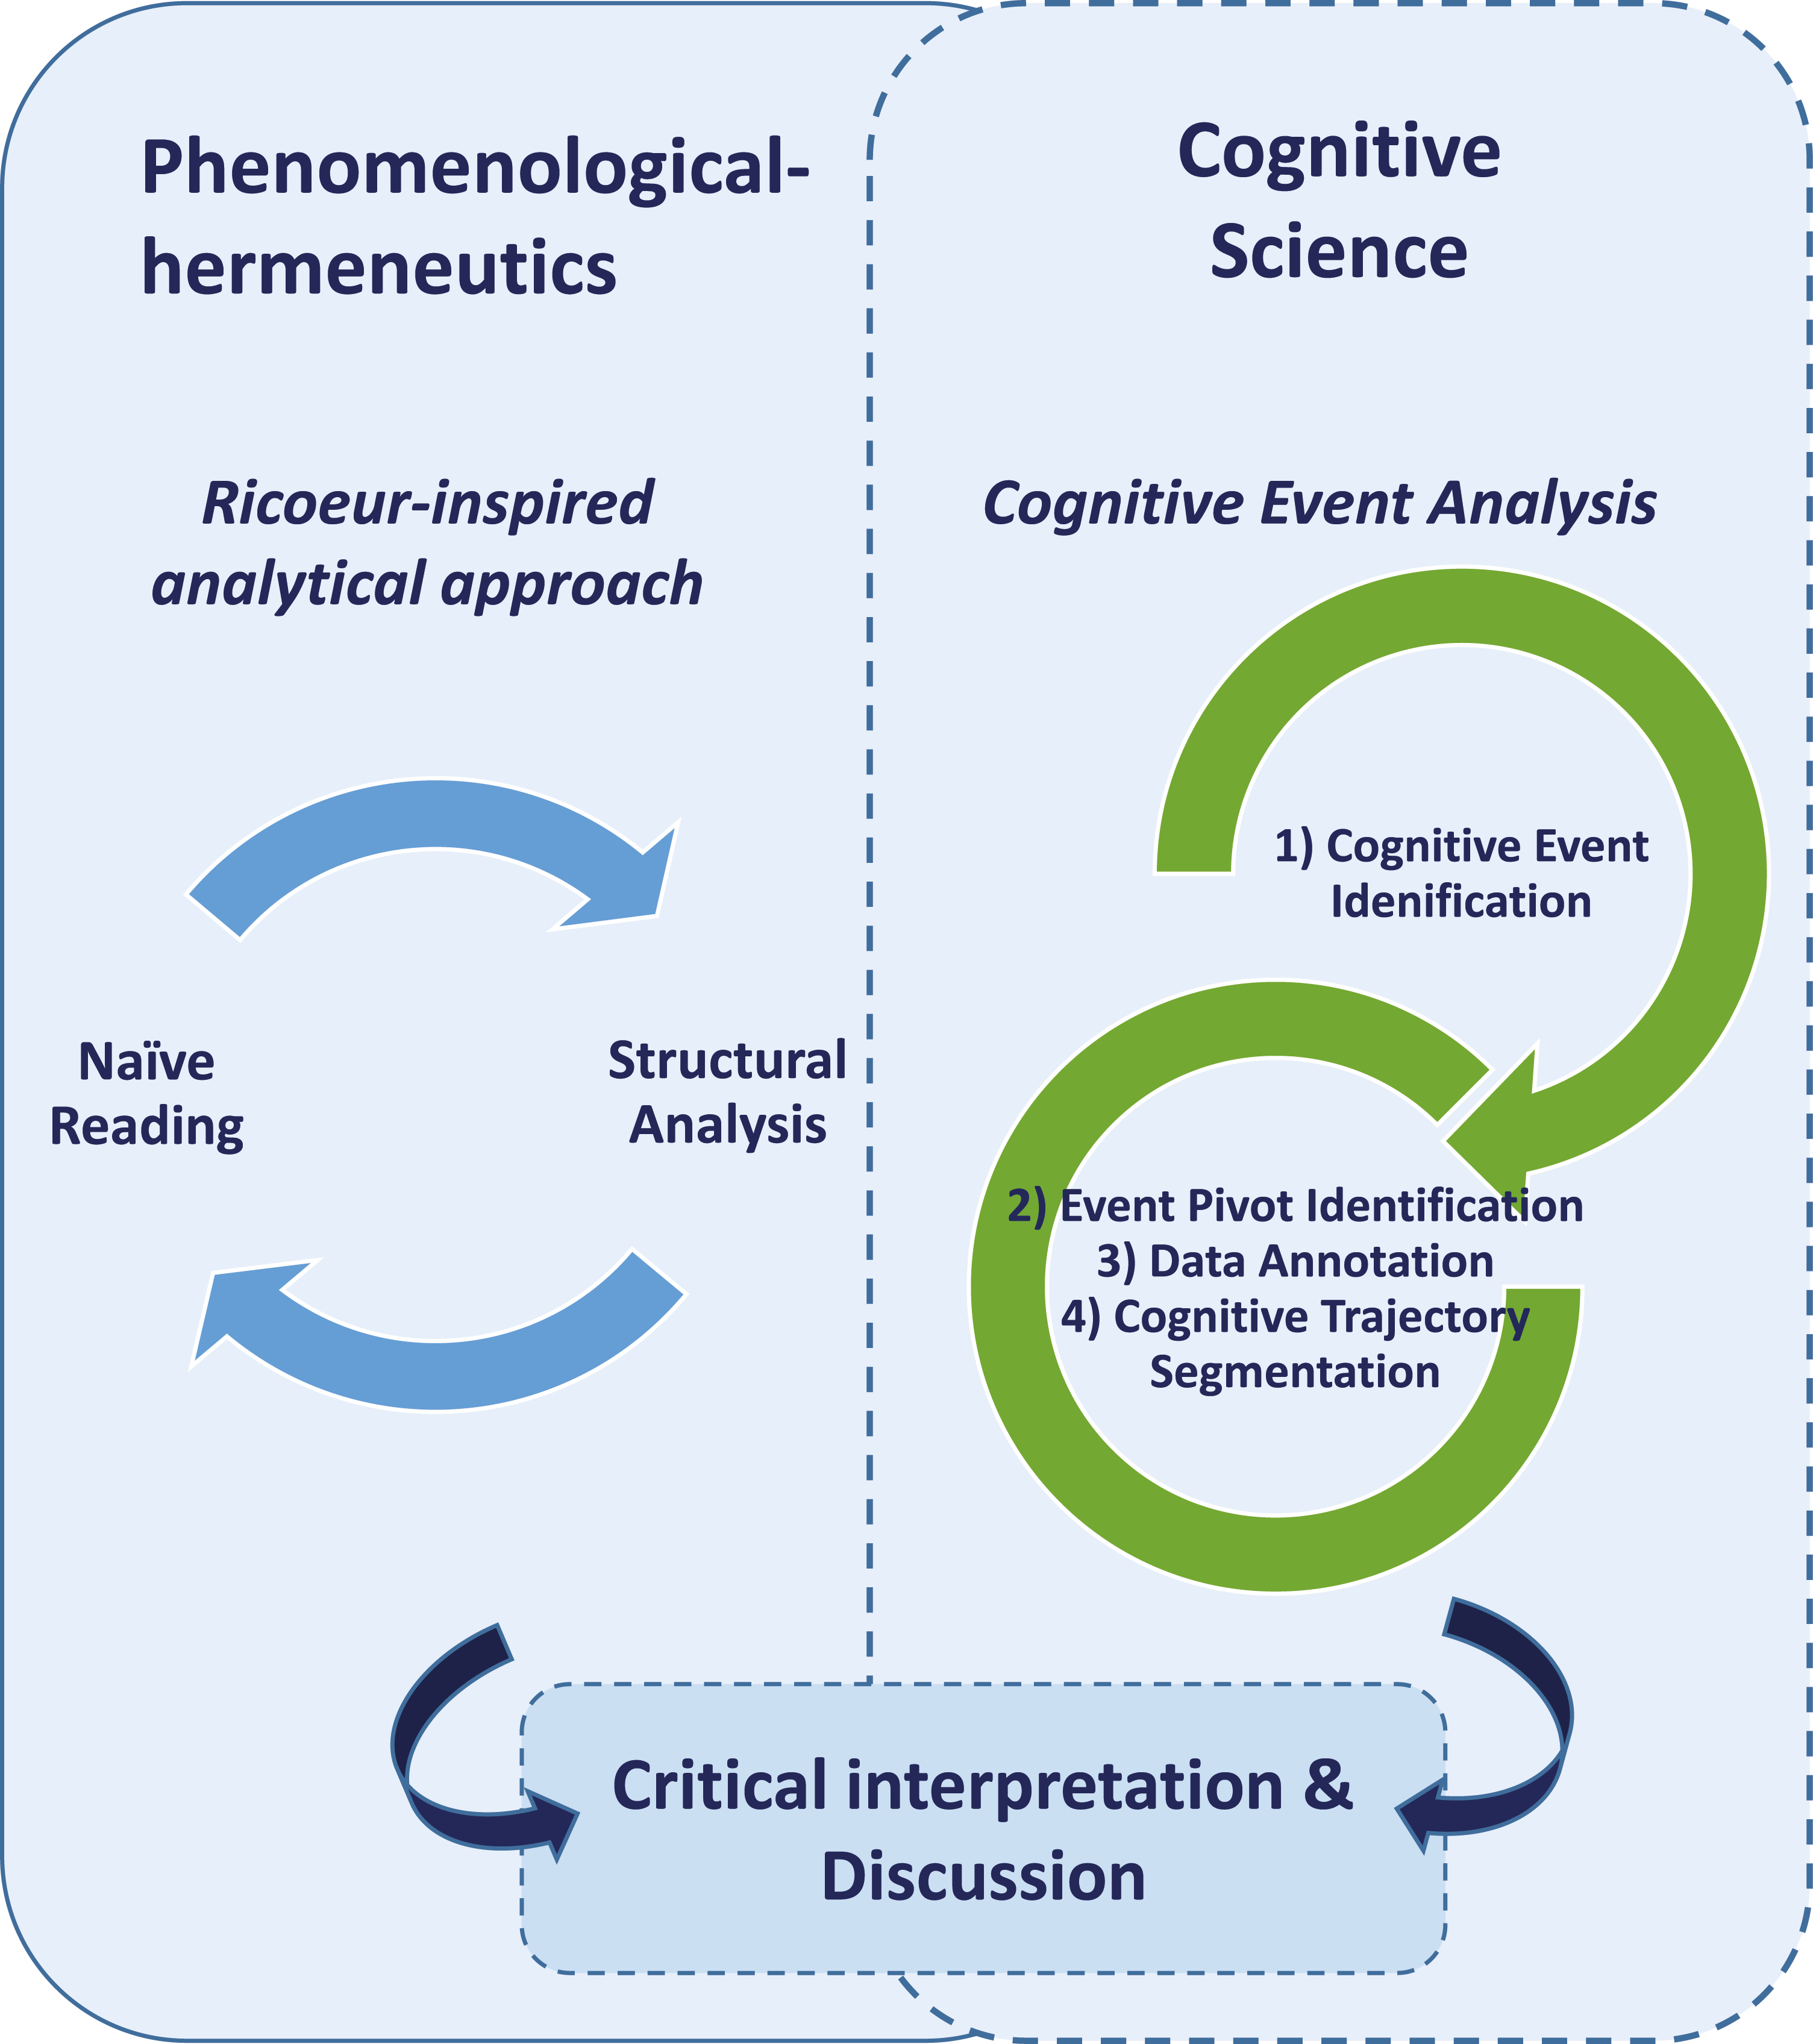 The hybrid method RI-CEA, a phenomenological–hermeneutic approach combined with a cognitive science approach